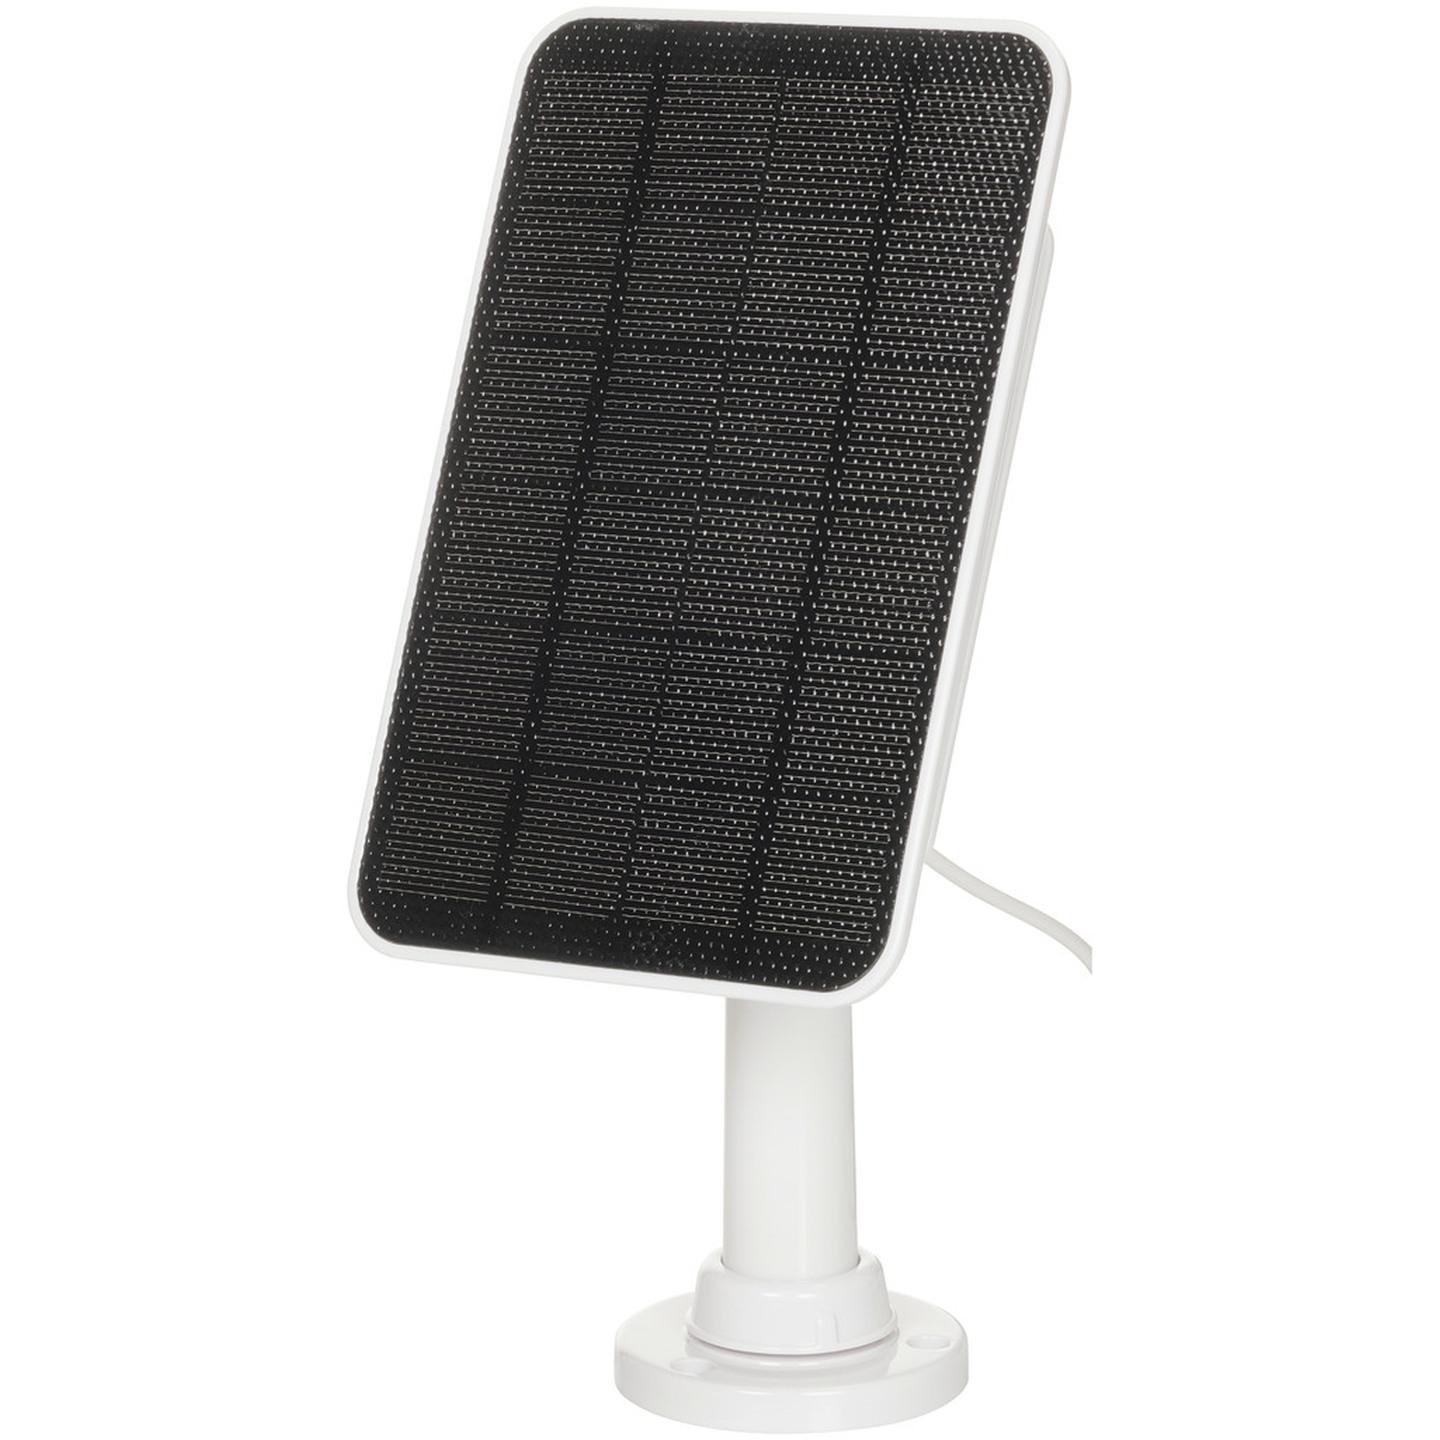 Concord Solar Panel to Suit Wi-Fi Battery Powered Cameras QV5520/QV5522